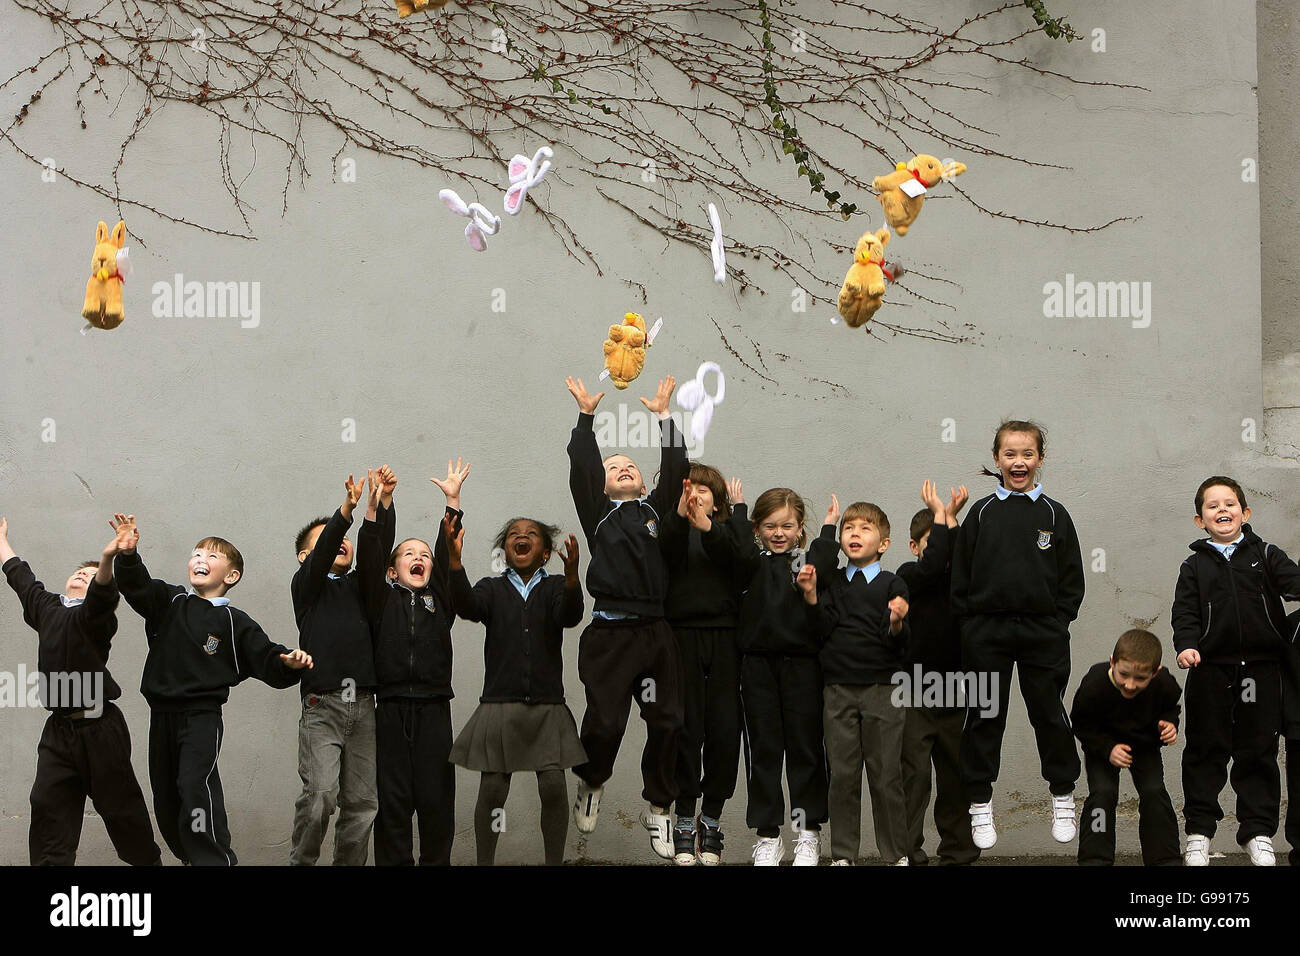 Pupils from St Aodoen's Primary School in Dublin during the Gold Lindt Easter Bunny visit, Tuesday March 28, 2006. PRESS ASSOCIATION Photo. Photo credit should read: Julien Behal/PA Stock Photo